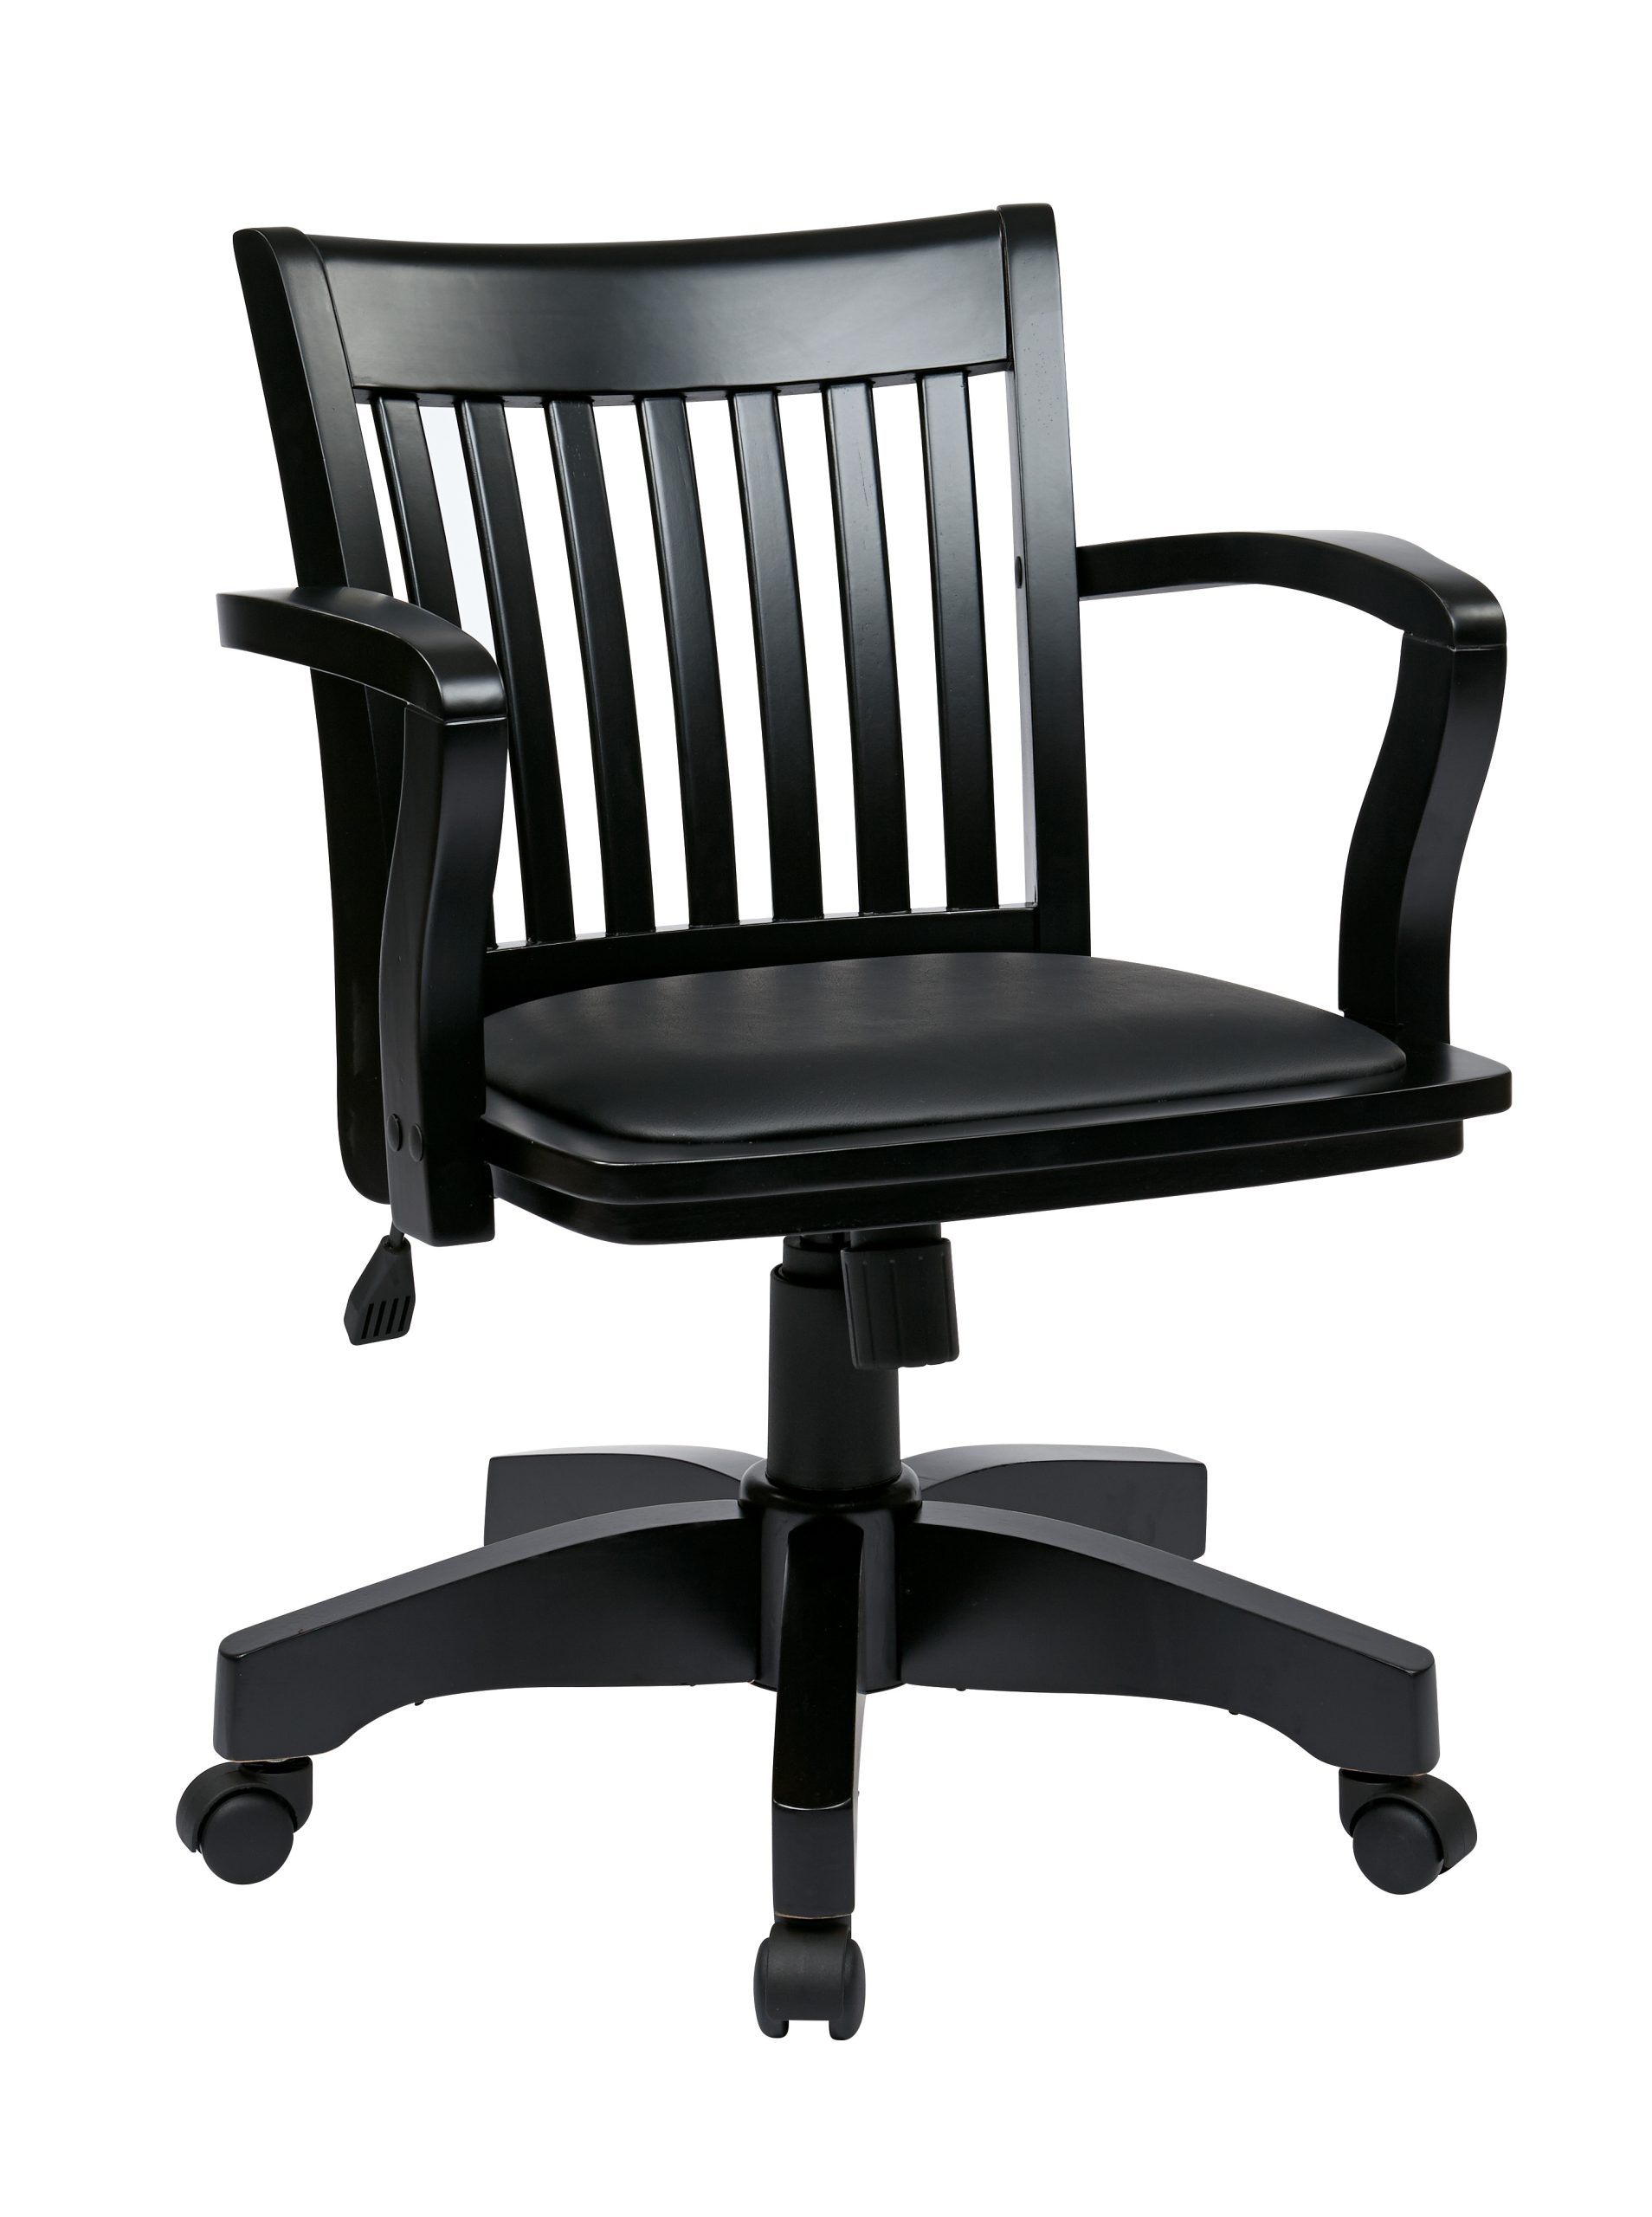 https://www.madisonseating.com/wp-content/uploads/2023/05/Deluxe-Wood-Bankers-Chair-with-Vinyl-Padded-Seat-BlackEspresso-by-OSP-Designs-Office-Star-scaled.jpg